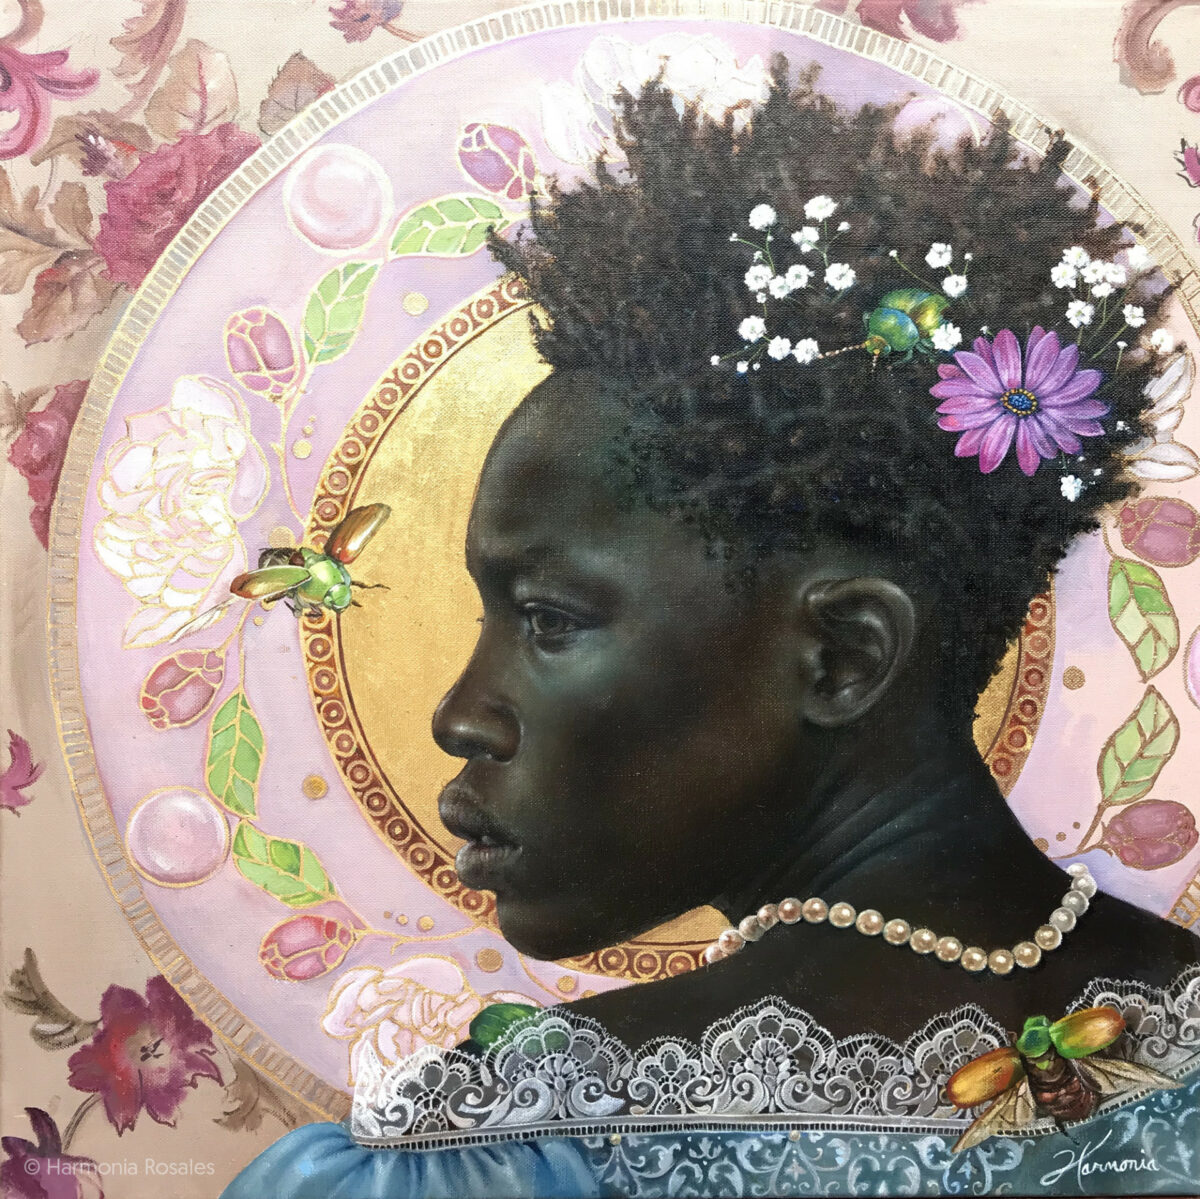 Powerful Portraits Of Black Figures Painted In The Classical European Style By Harmonia Rosales 1